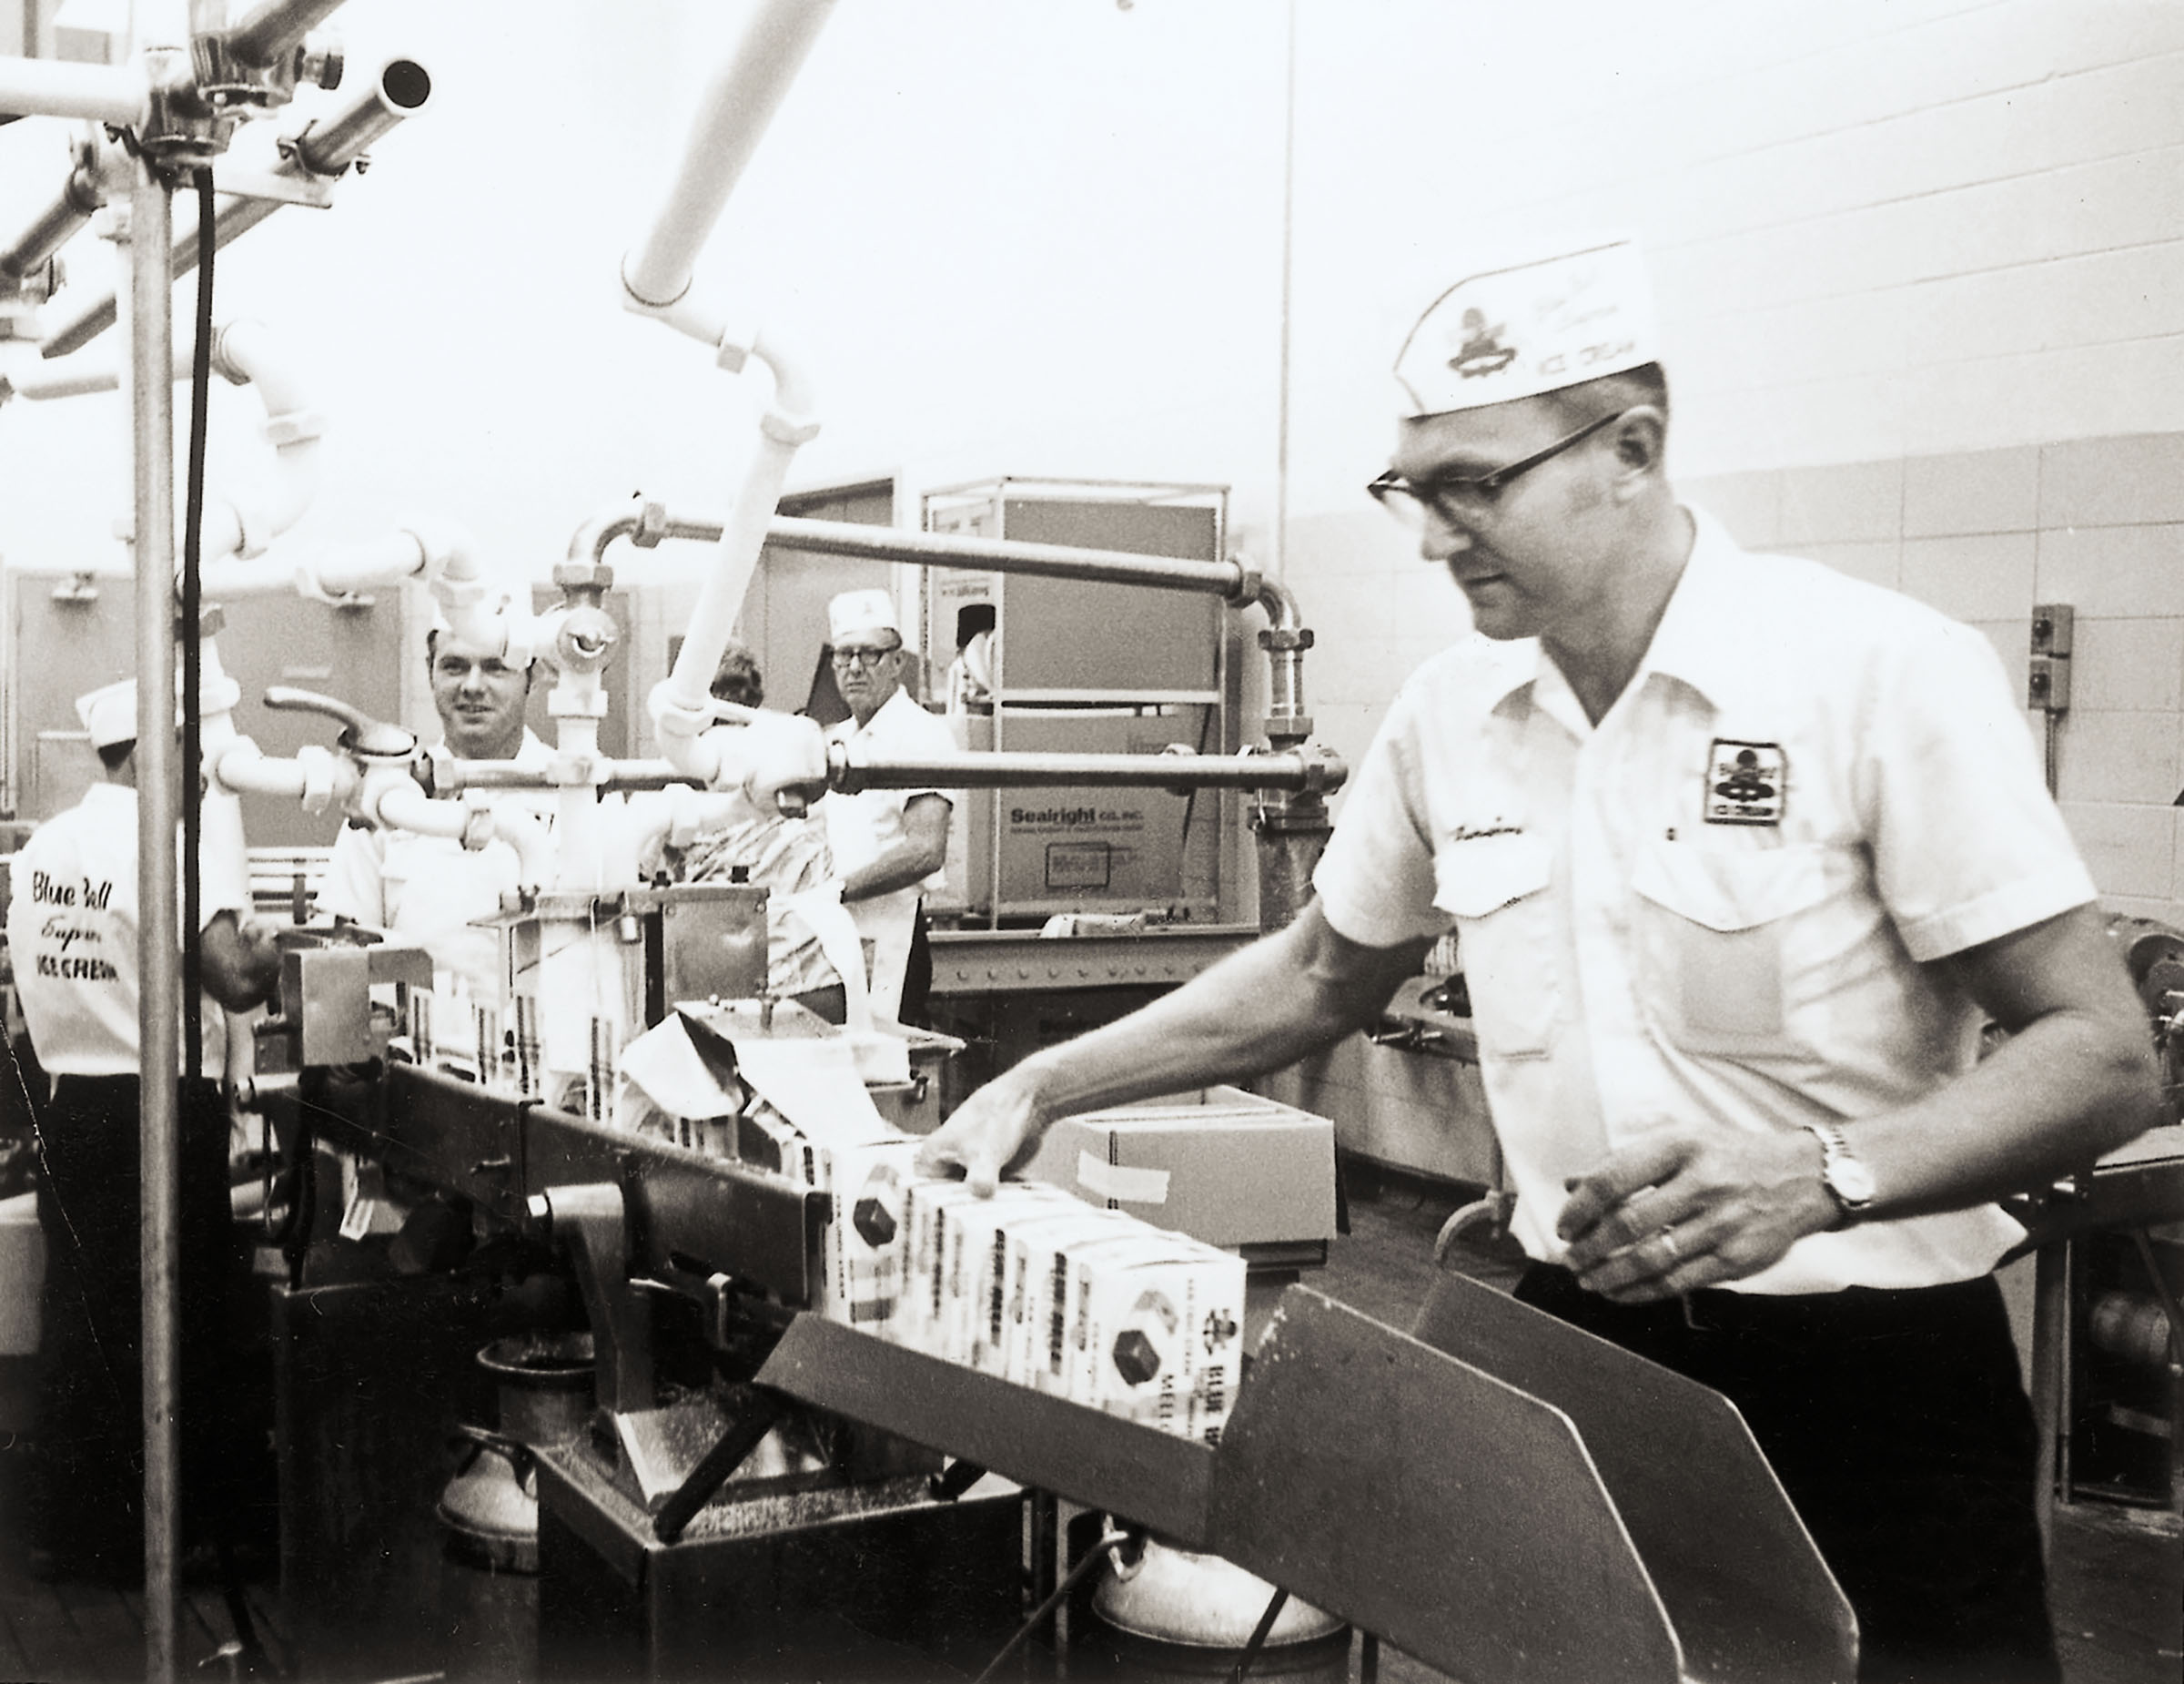 A historic photo of a man in a Blue Bell uniform and hat packaging ice cream